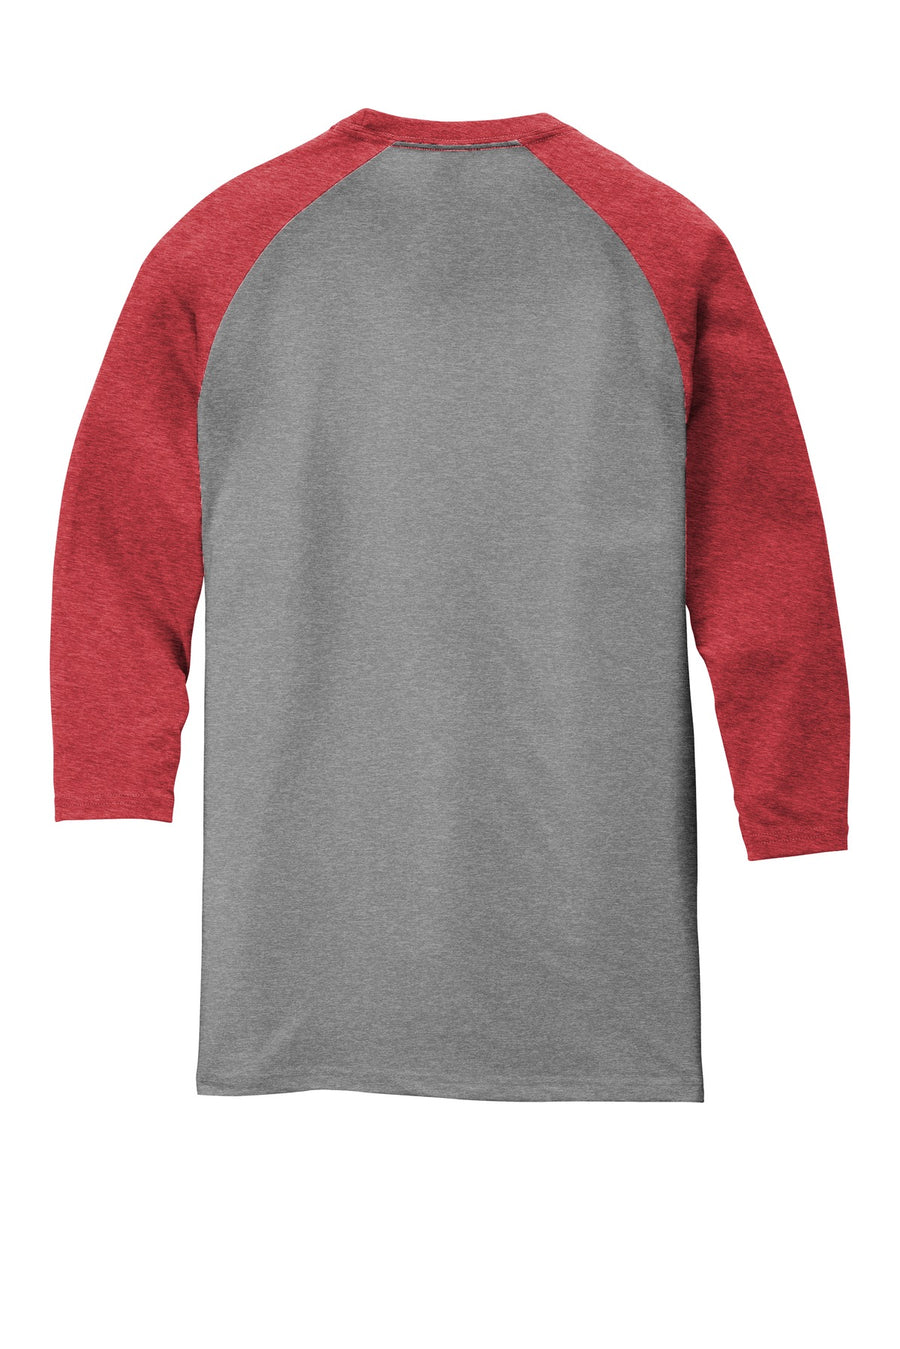 DM136-Red Frost/ Grey Frost-back_flat